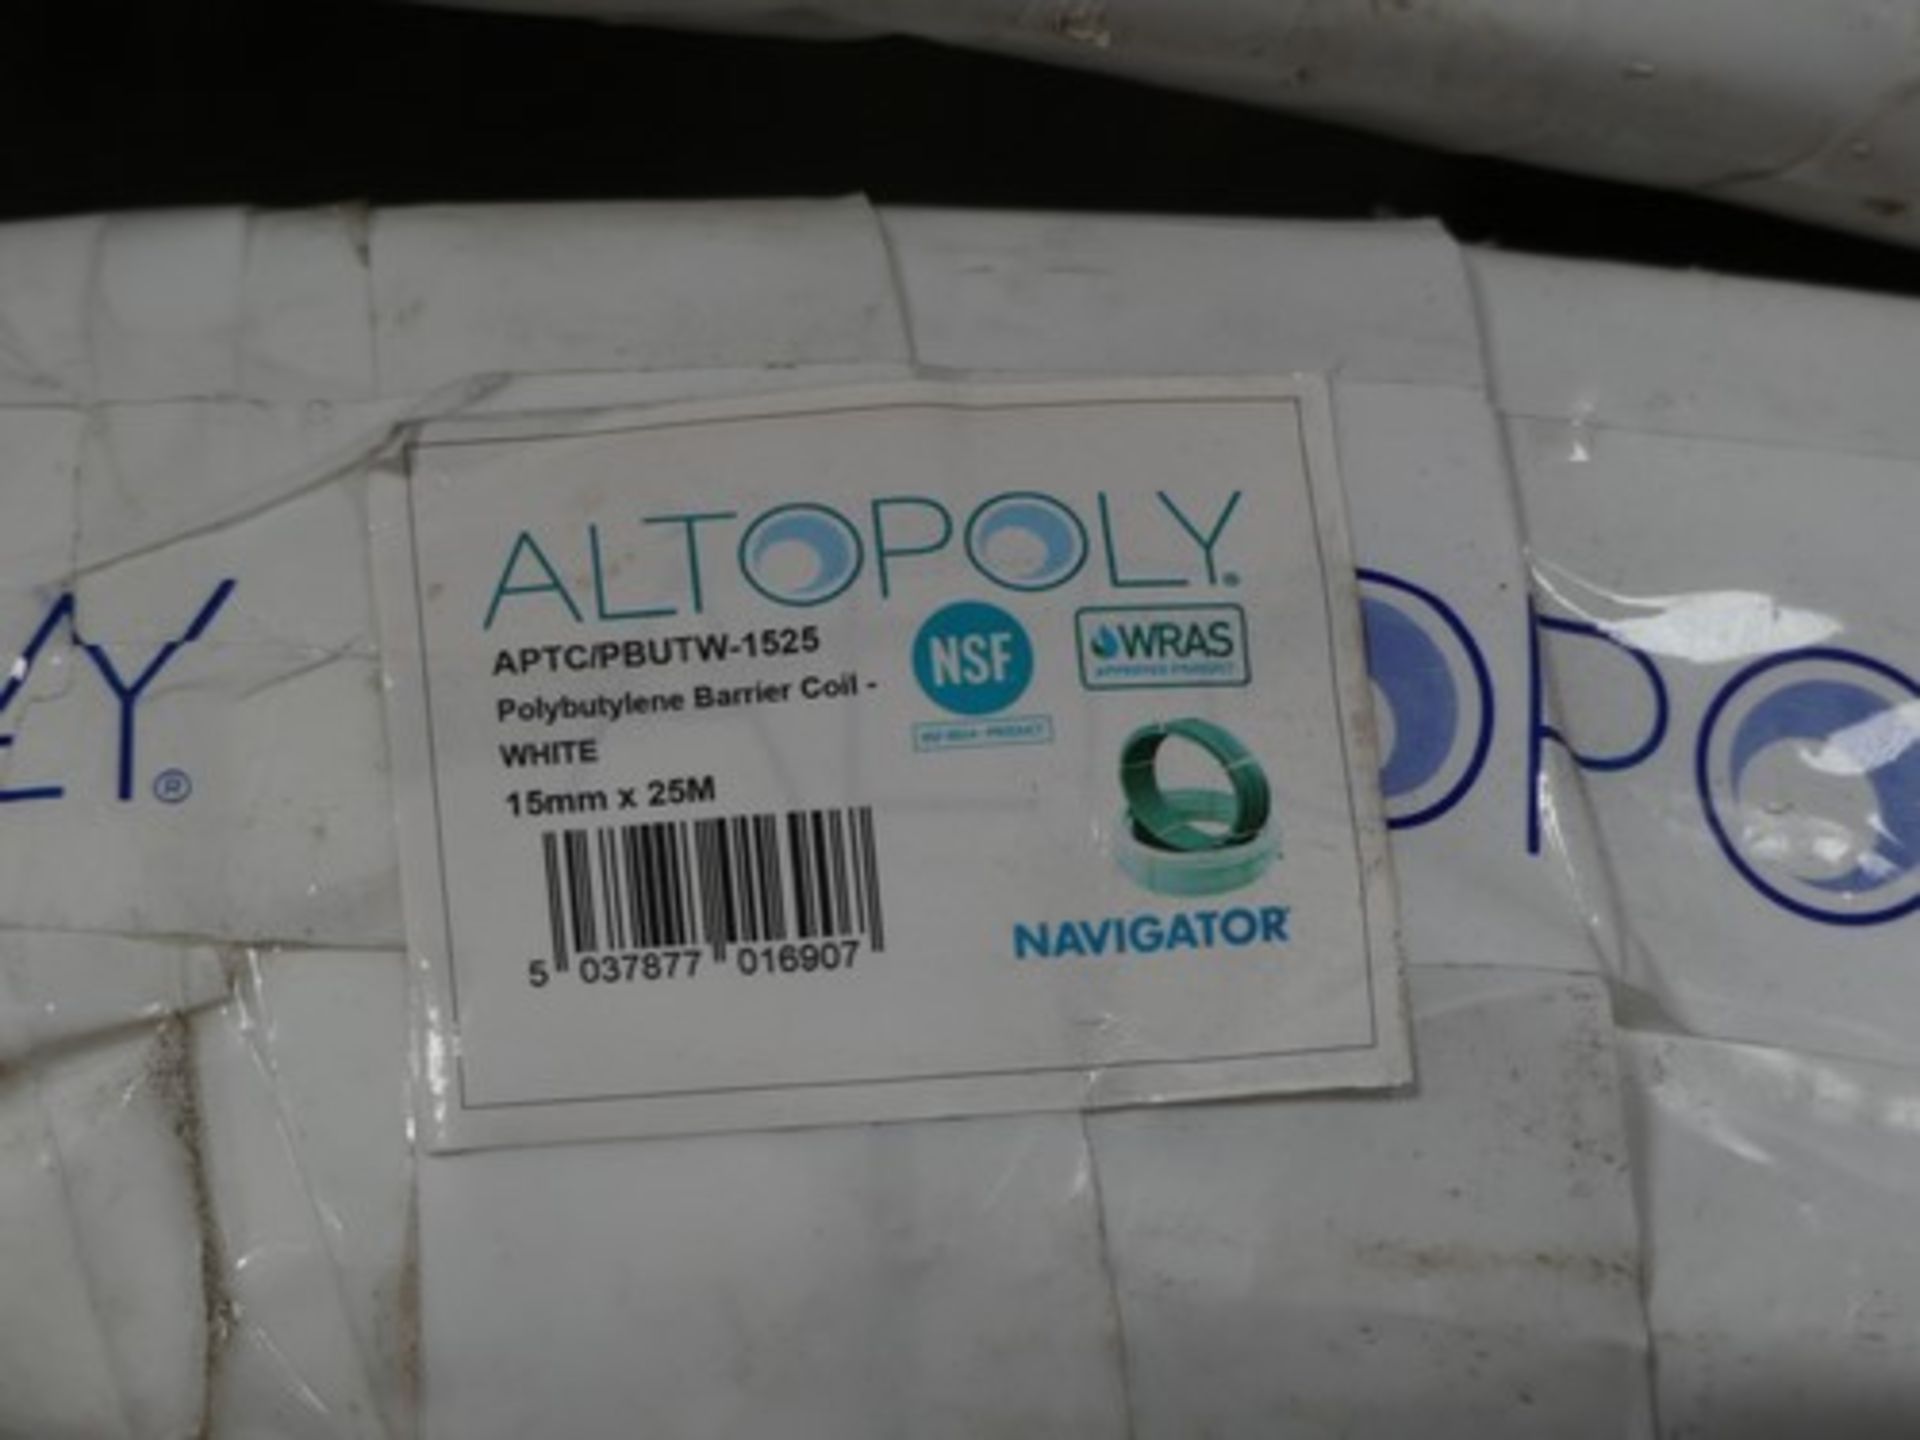 6 x rolls of Altopoly polybutylene barrier coil, comprising 3 x rolls of 15mm x 25m - white, 1 x - Image 2 of 5